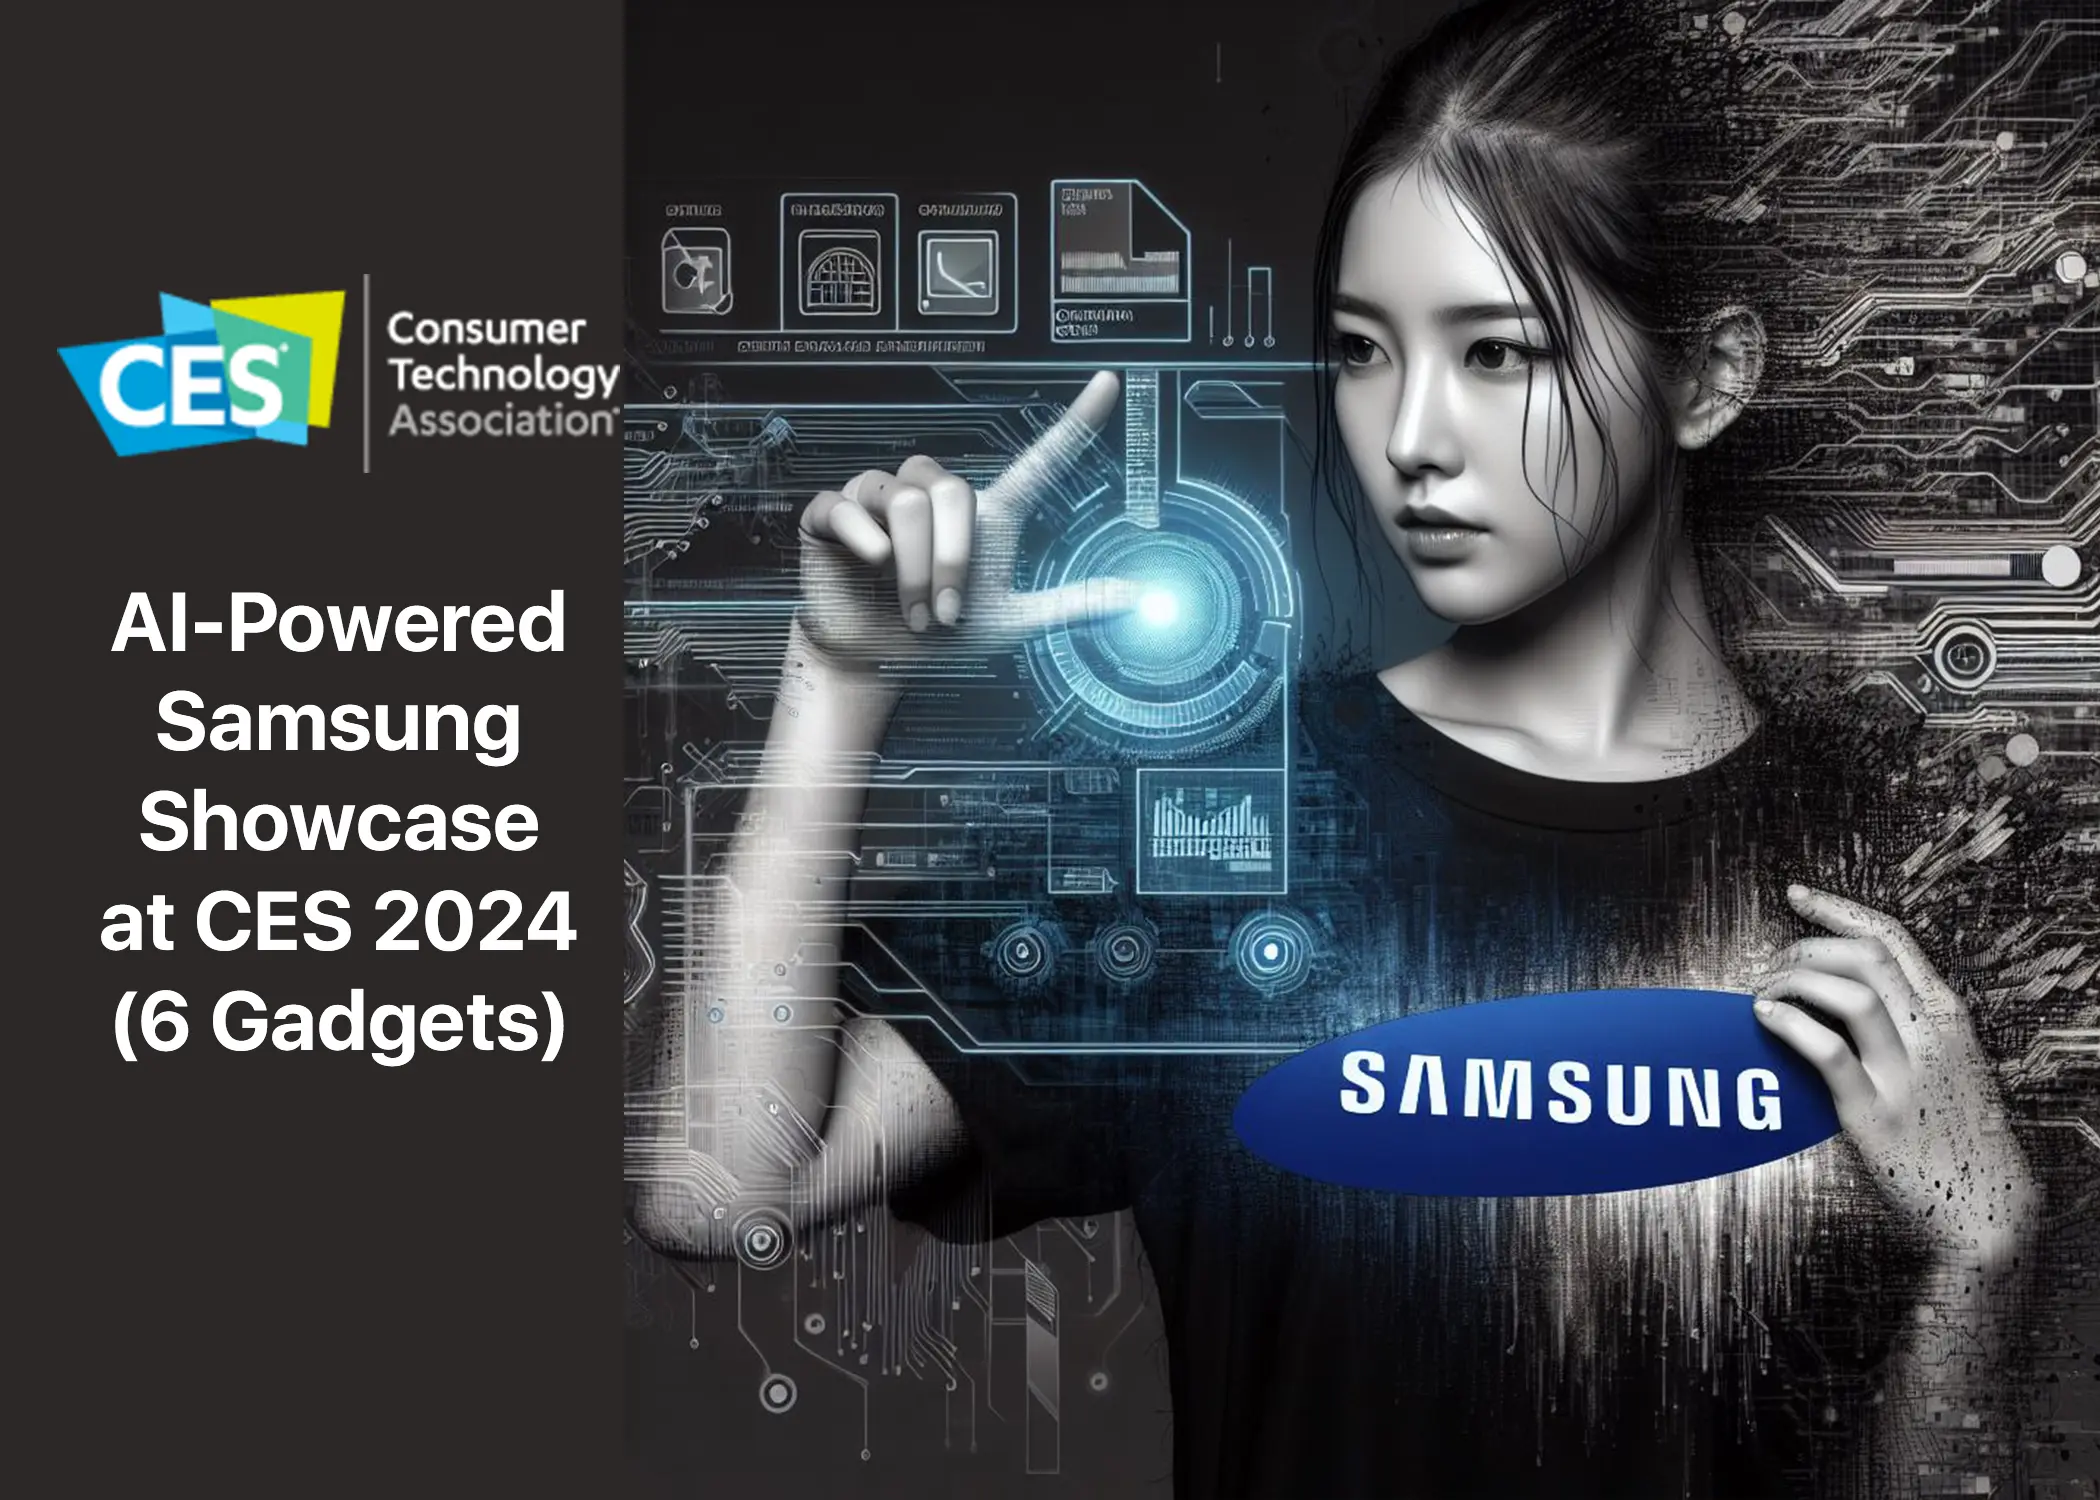 Every AI-Powered Samsung Showcase at CES 2024 (6 Gadgets)